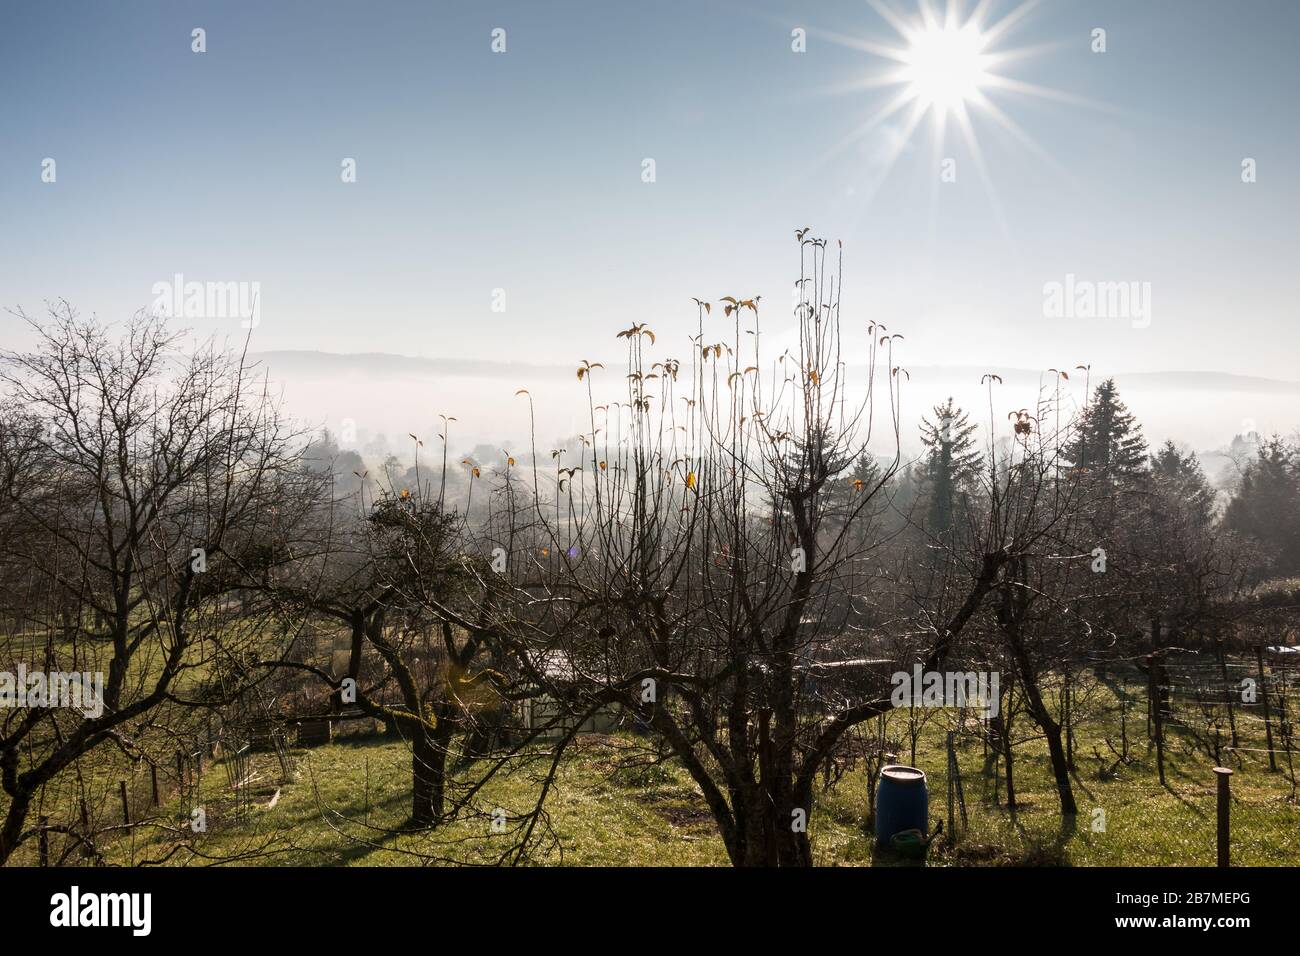 The sun above the green garden and dense fog in the valley Stock Photo